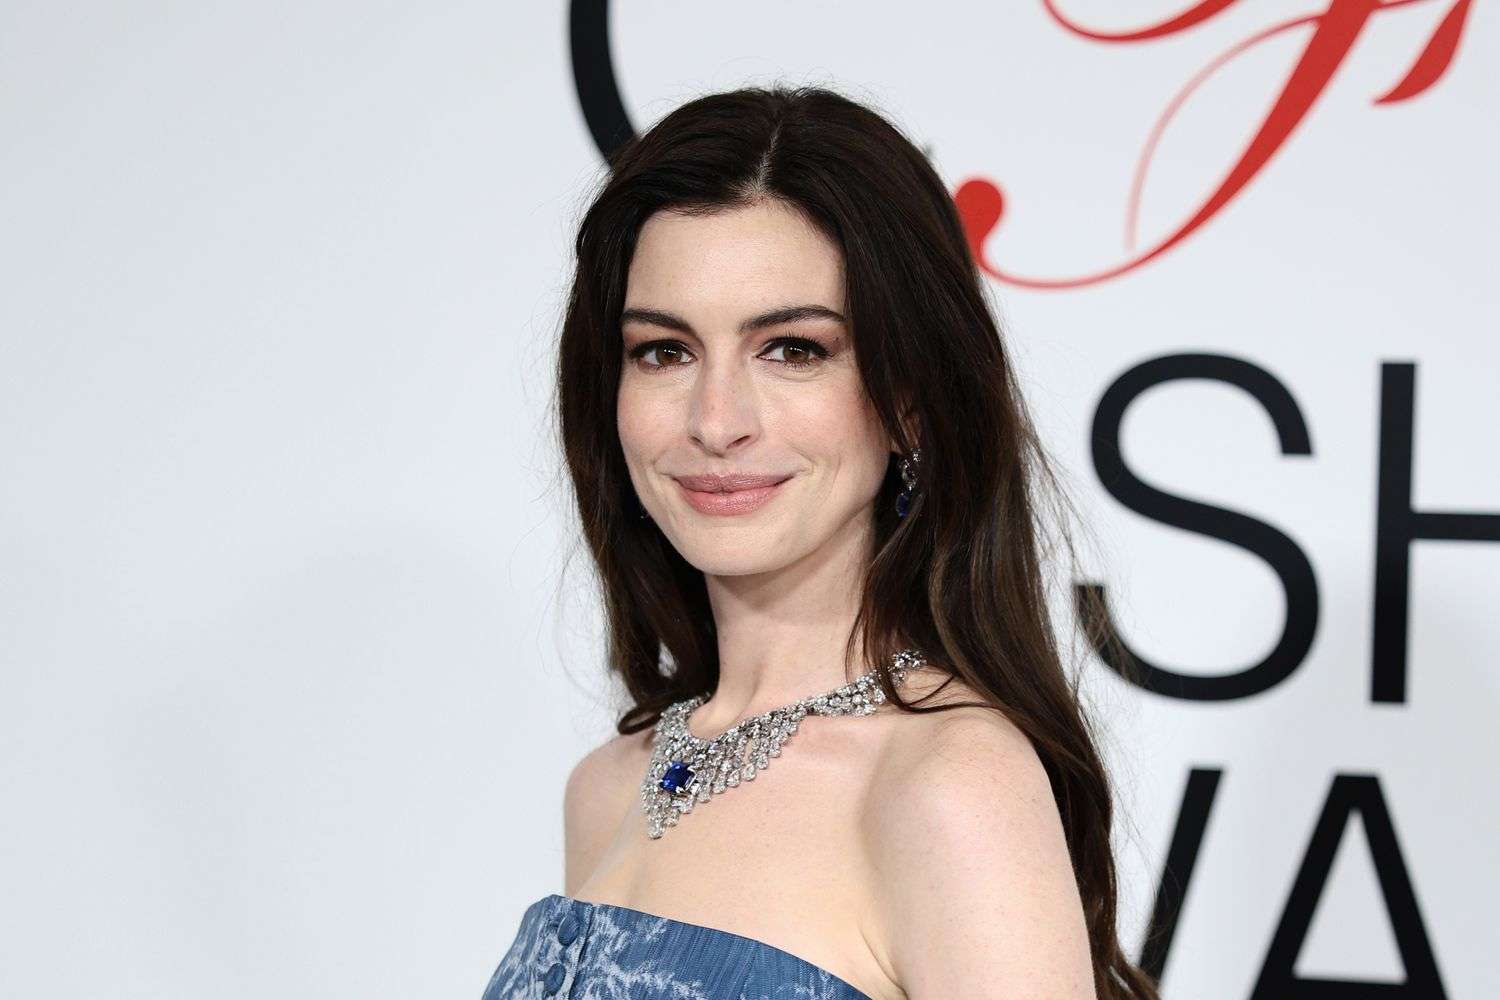 Anne Hathaway Biography: Movies, Age, Parents, Net Worth, Partner, Nationality, TV Shows, Siblings, Wiki, Instagram